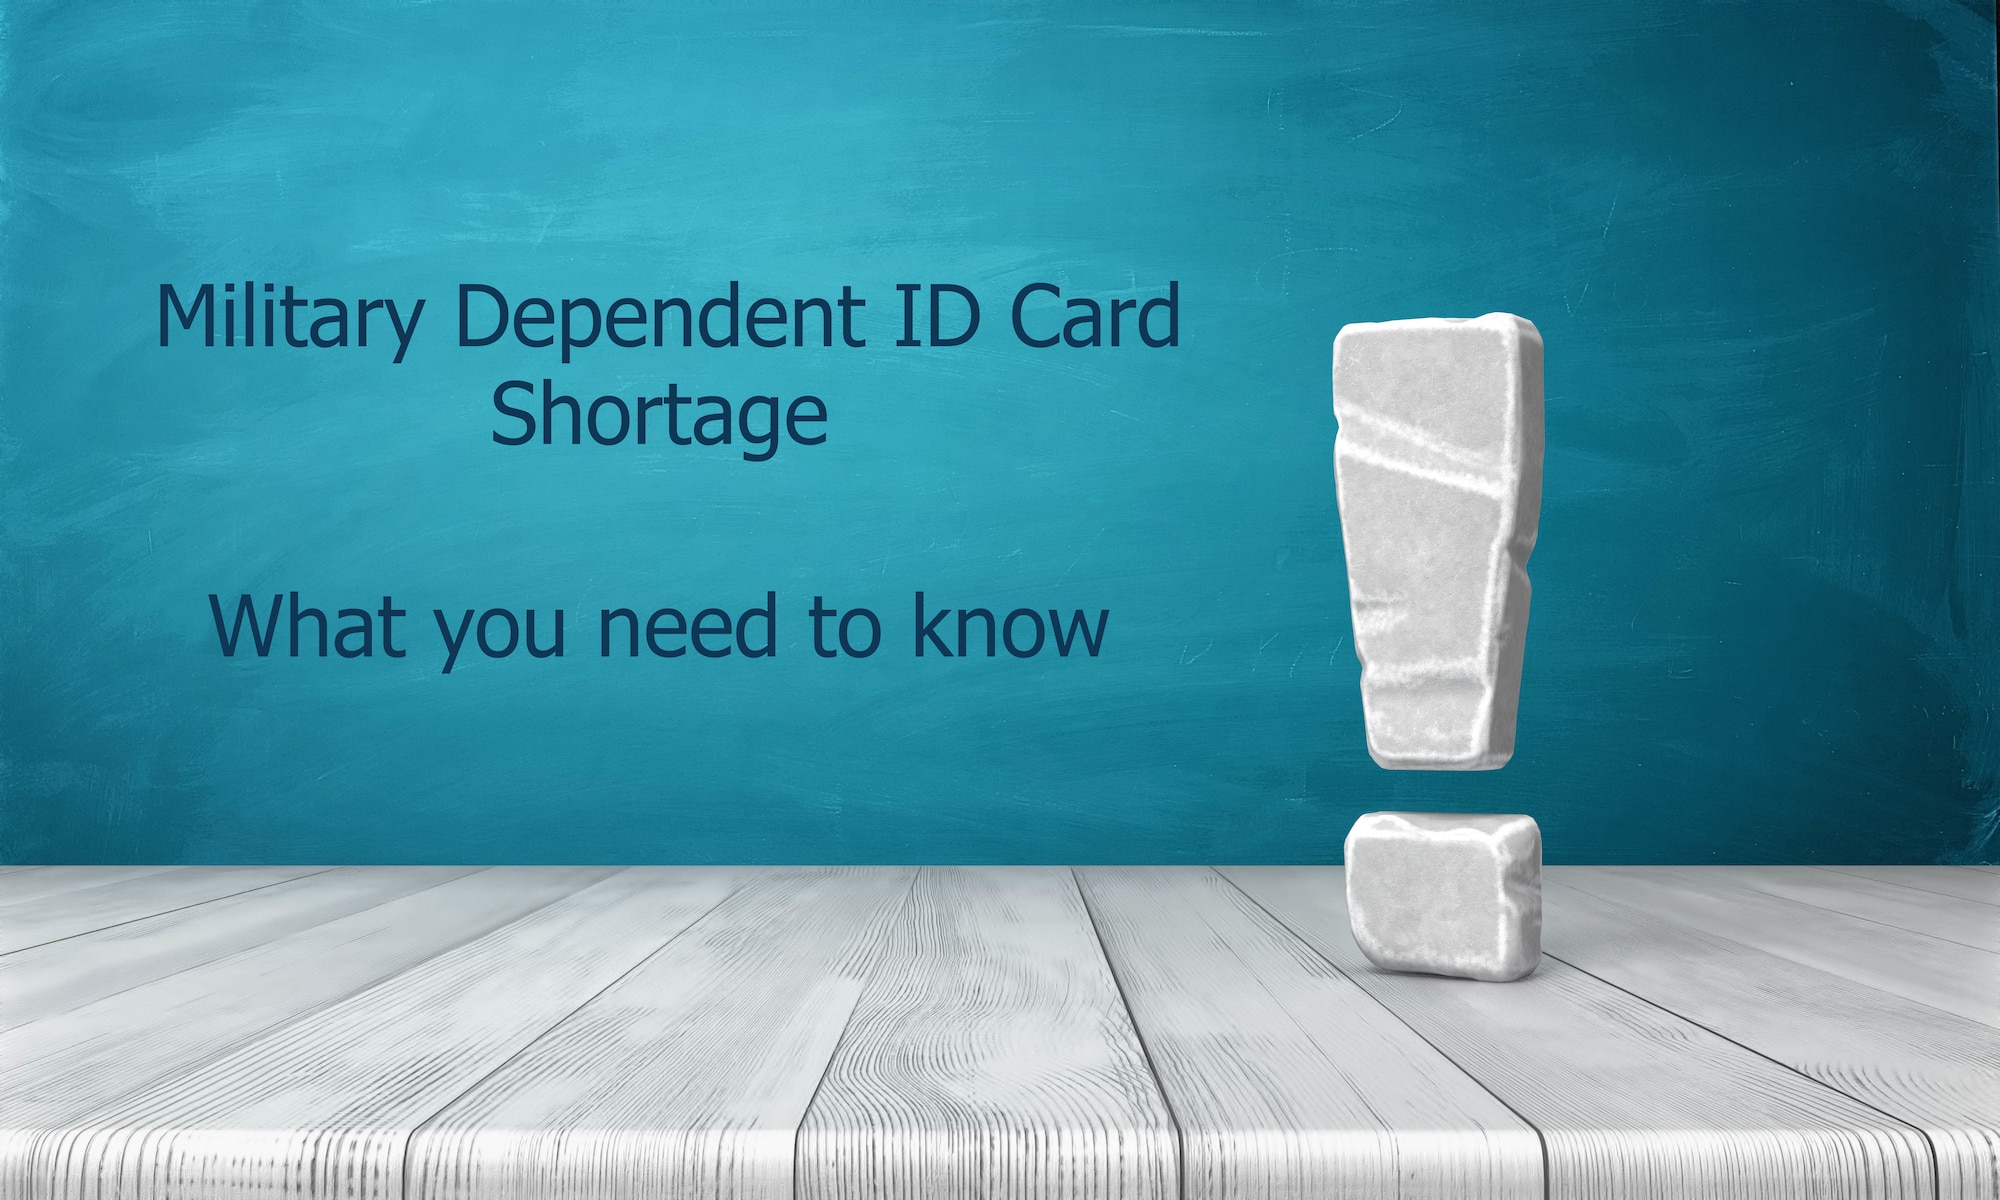 Graphic has an exclamation point with the text, "Military Dependent ID Card Shortage: What you need to know."